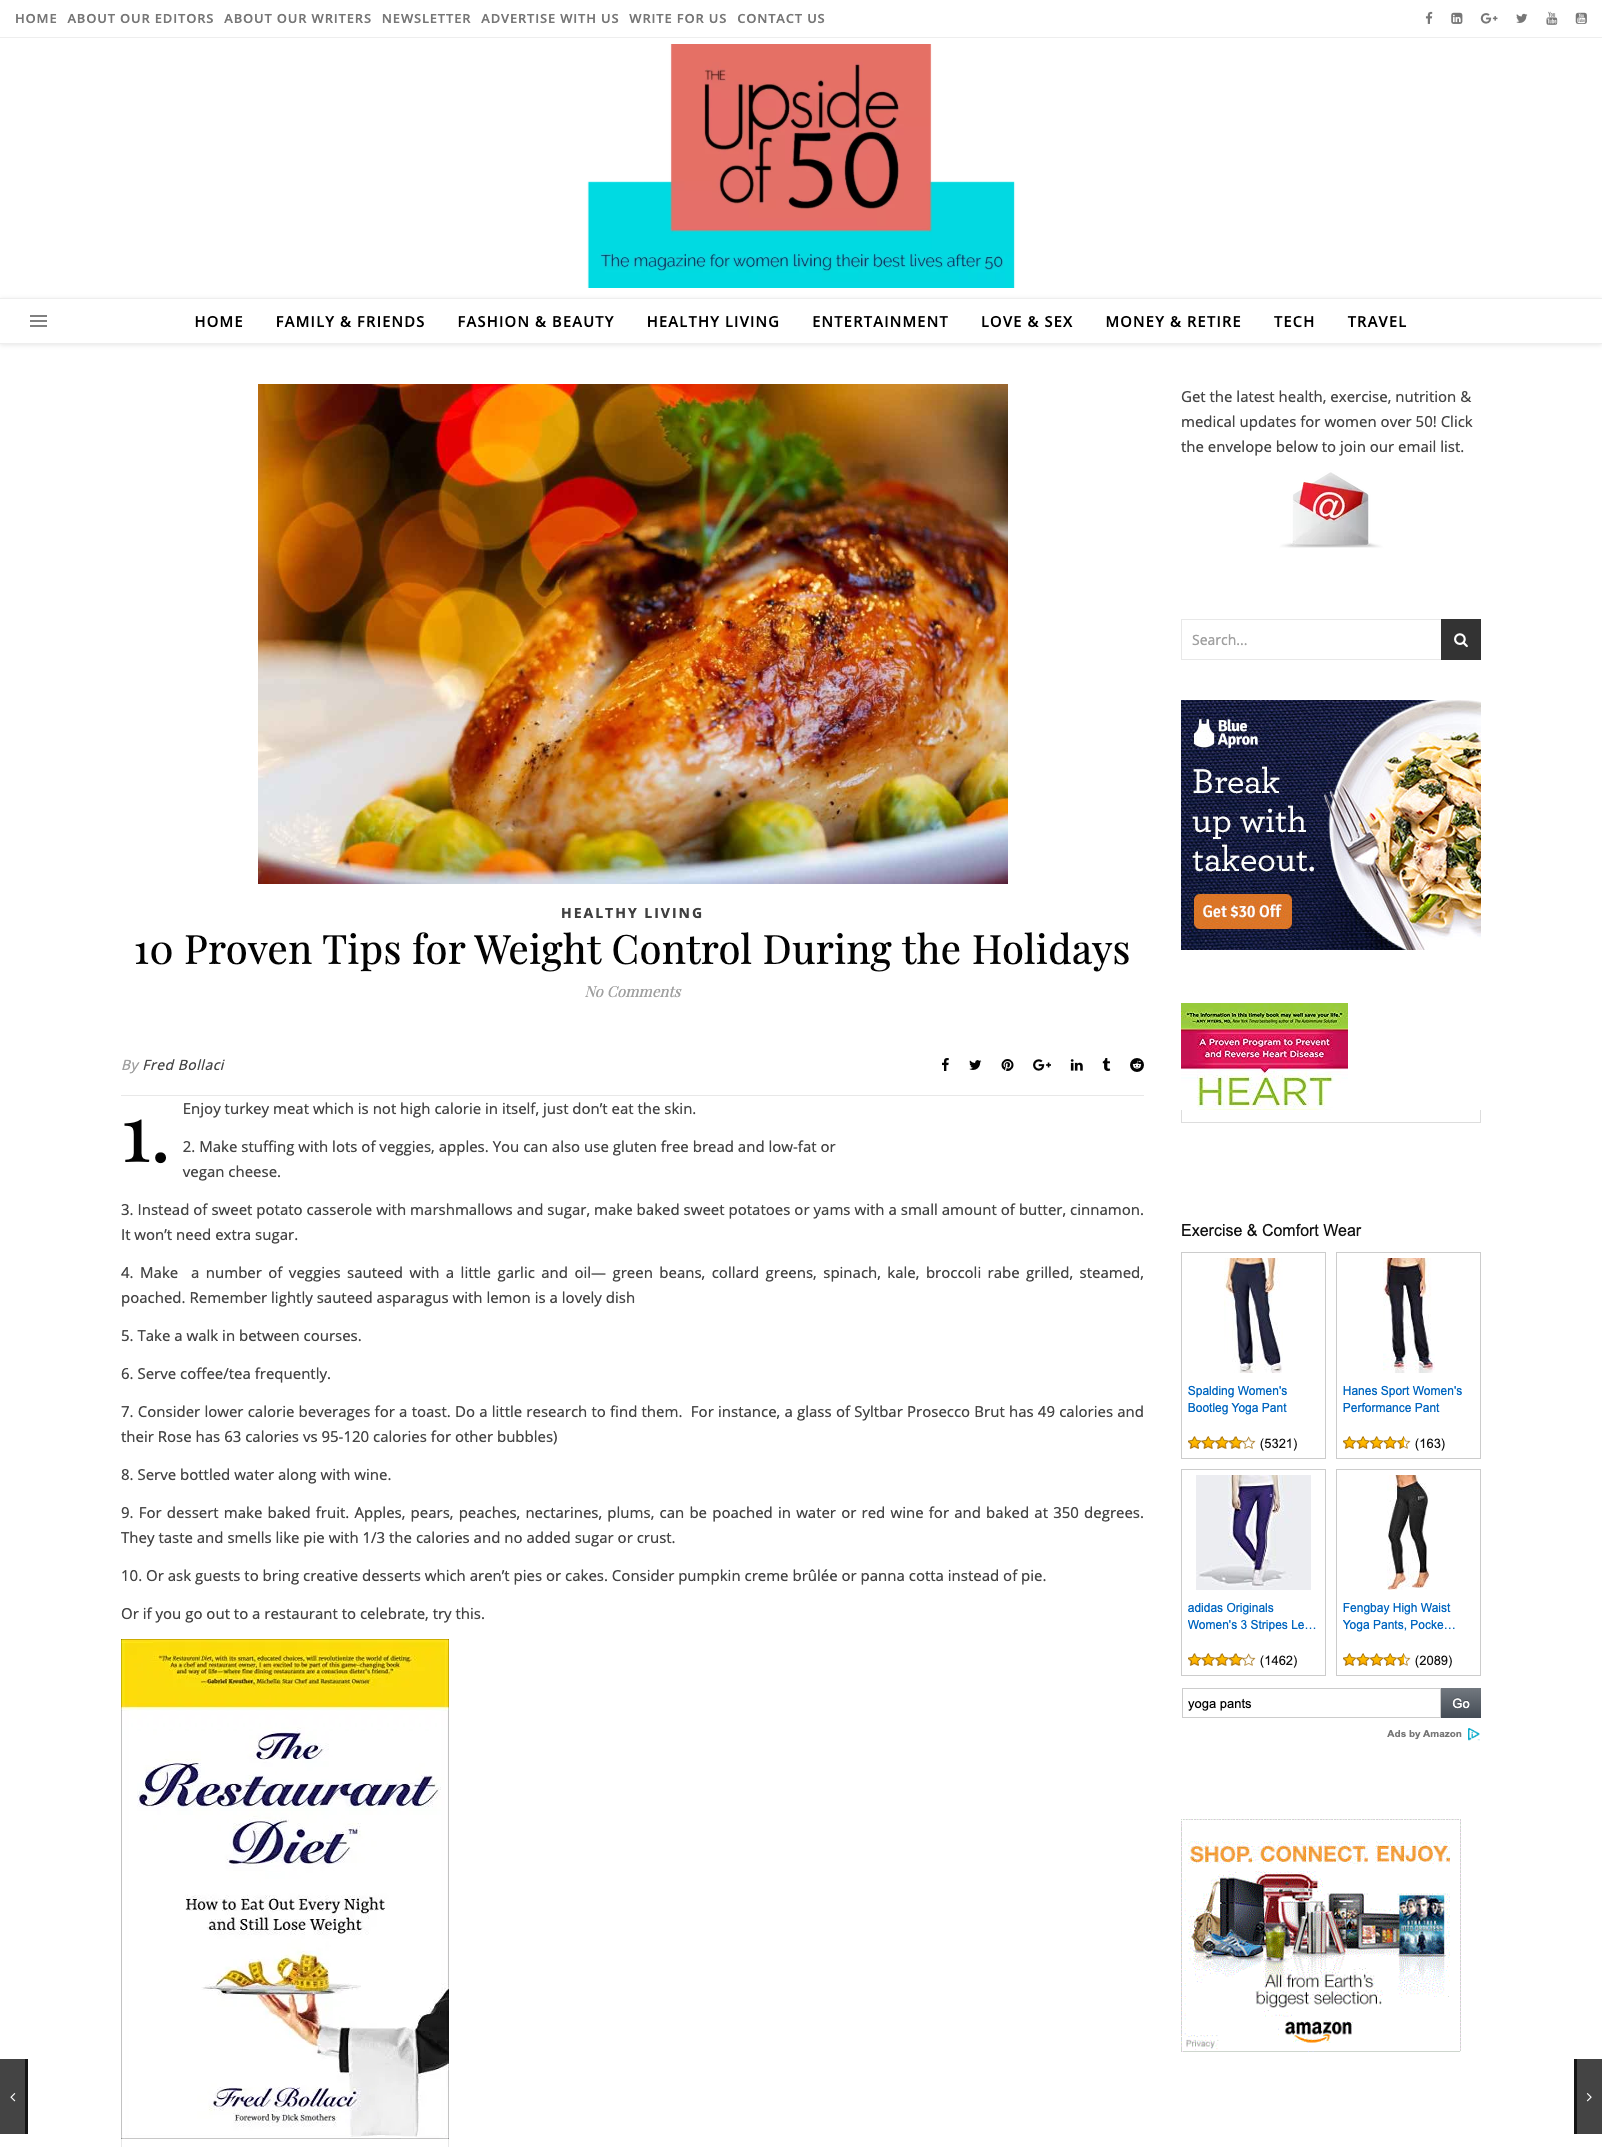 Weight Control during the Holidays with SYLTBAR –